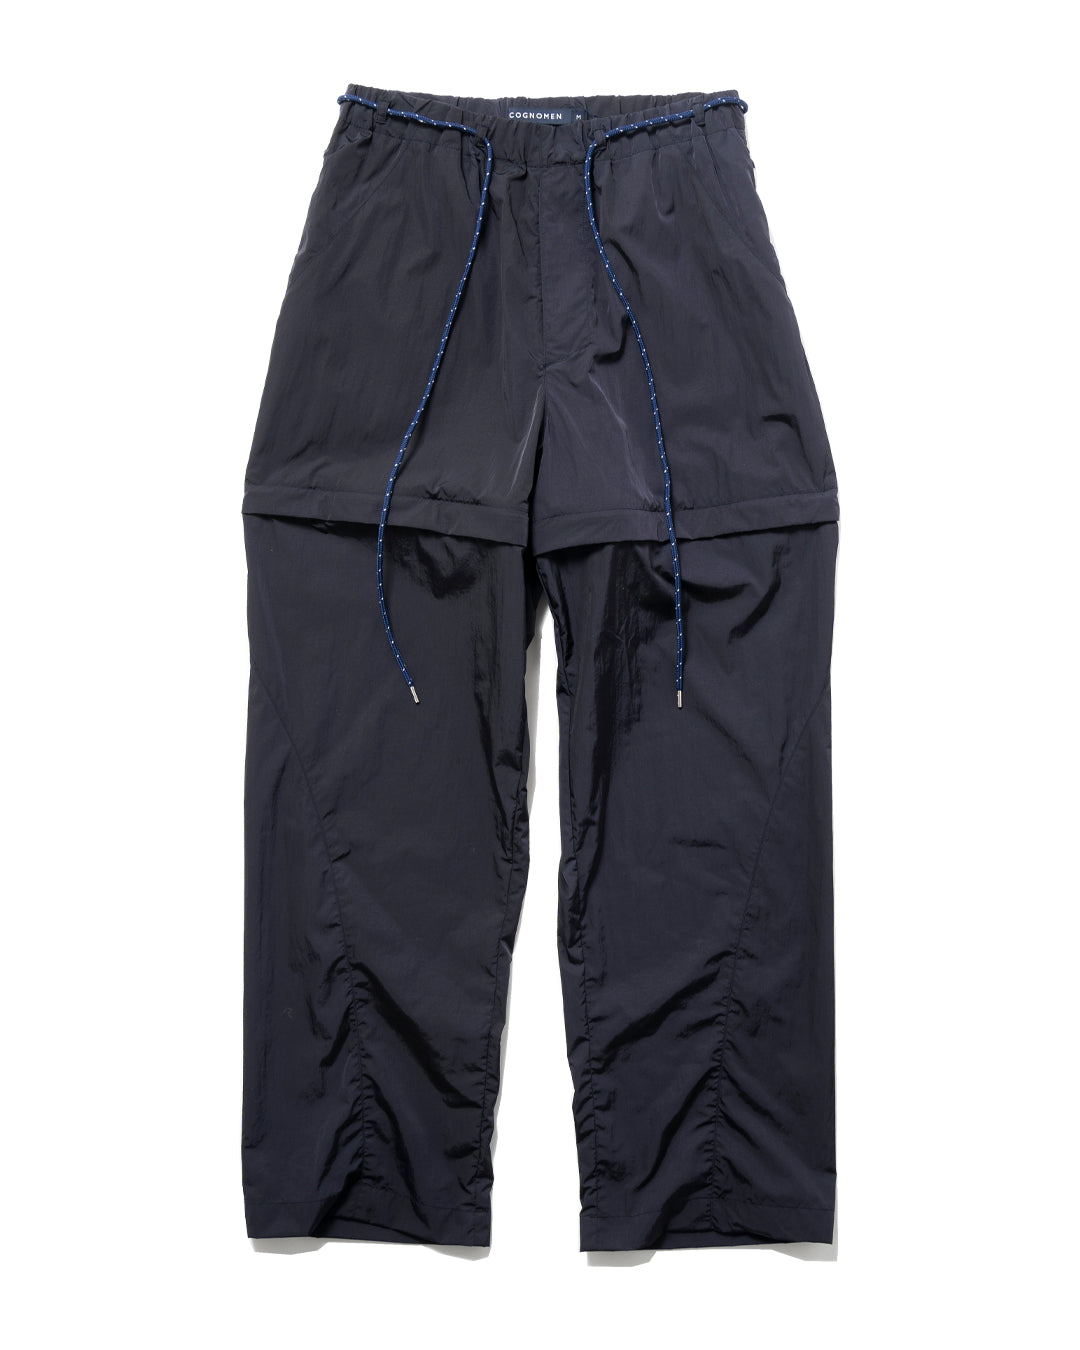 WATER PROOF TRAINING PANTS (NVY)